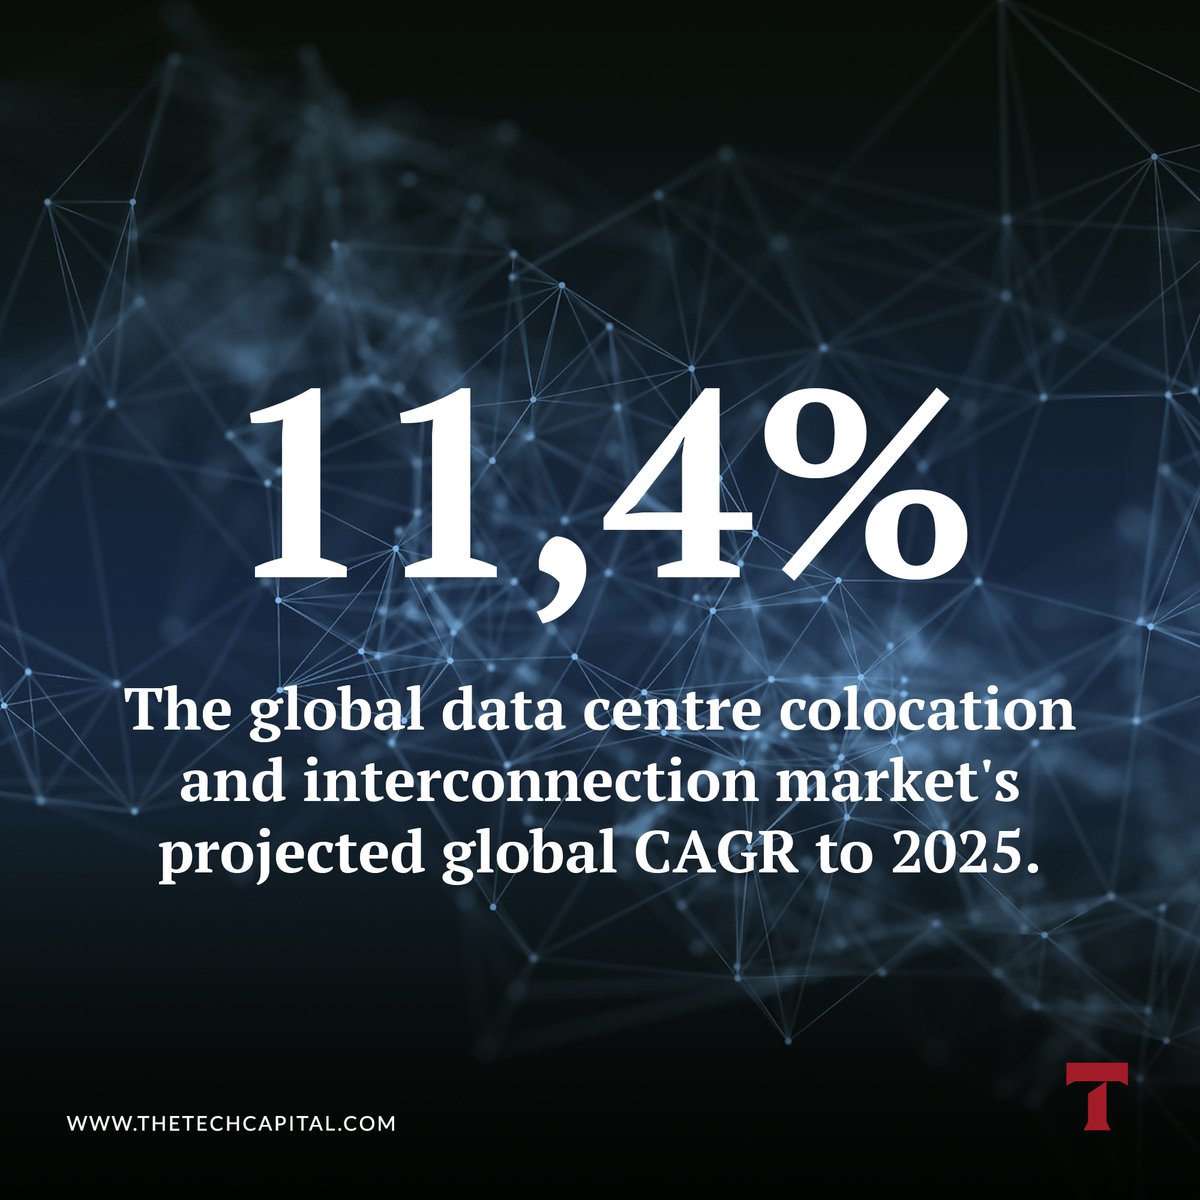 The global data centre colocation and interconnection market was estimated to be worth $53.9bn in 2020, a figure that represents 11.9% y/y growth.
 
#TheTechCapital #YouLeadWeReport
 
#datacenters @StructureRes #colocation #marketgrowth #datacenterreits #growthstrategy